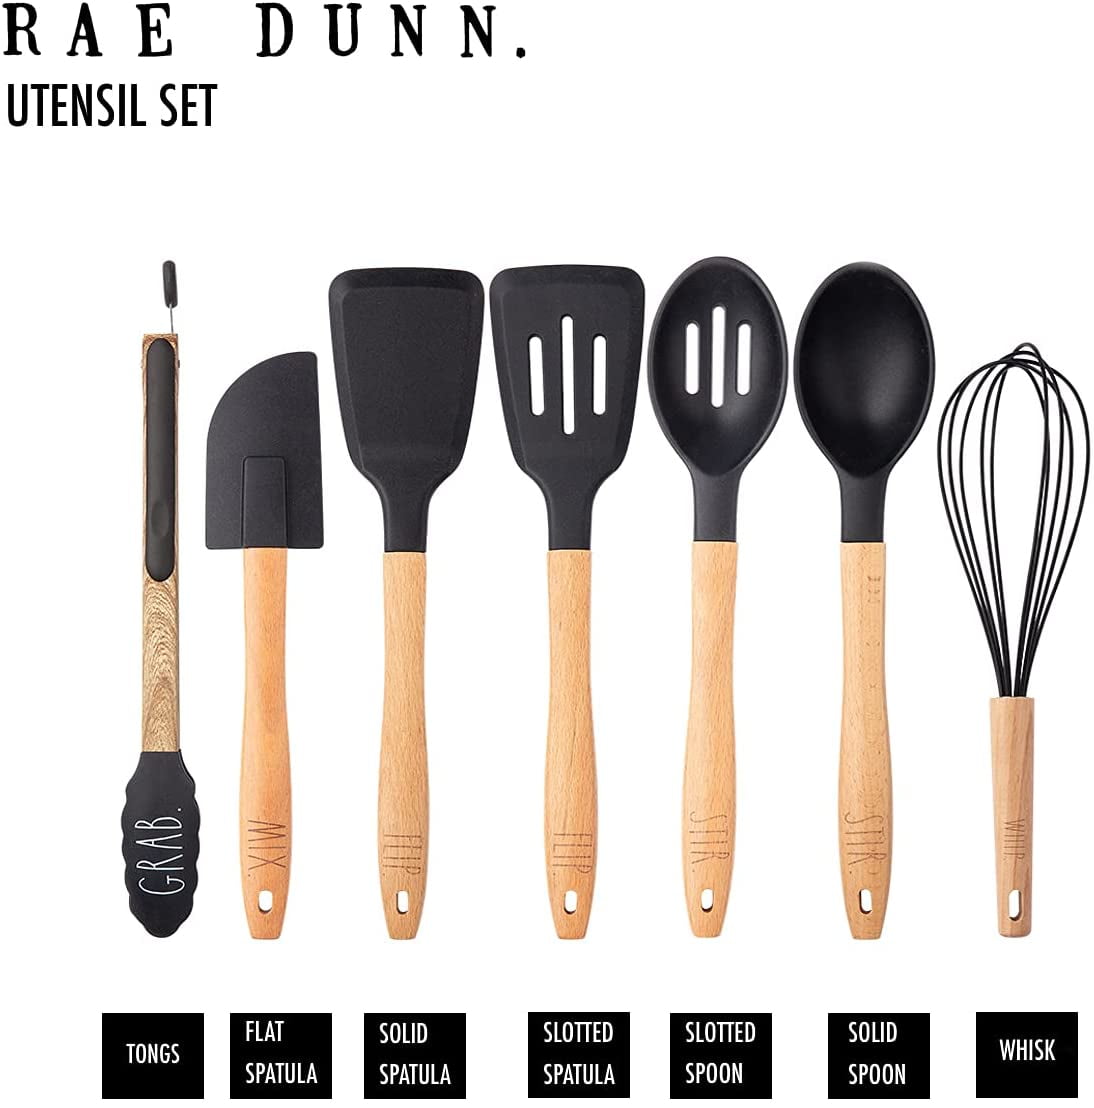  Rae Dunn Everyday Collection 7 Piece Wooden and Stainless Steel  Kitchen Gadget Set- Kitchen Tools with Wooden Handles : Home & Kitchen